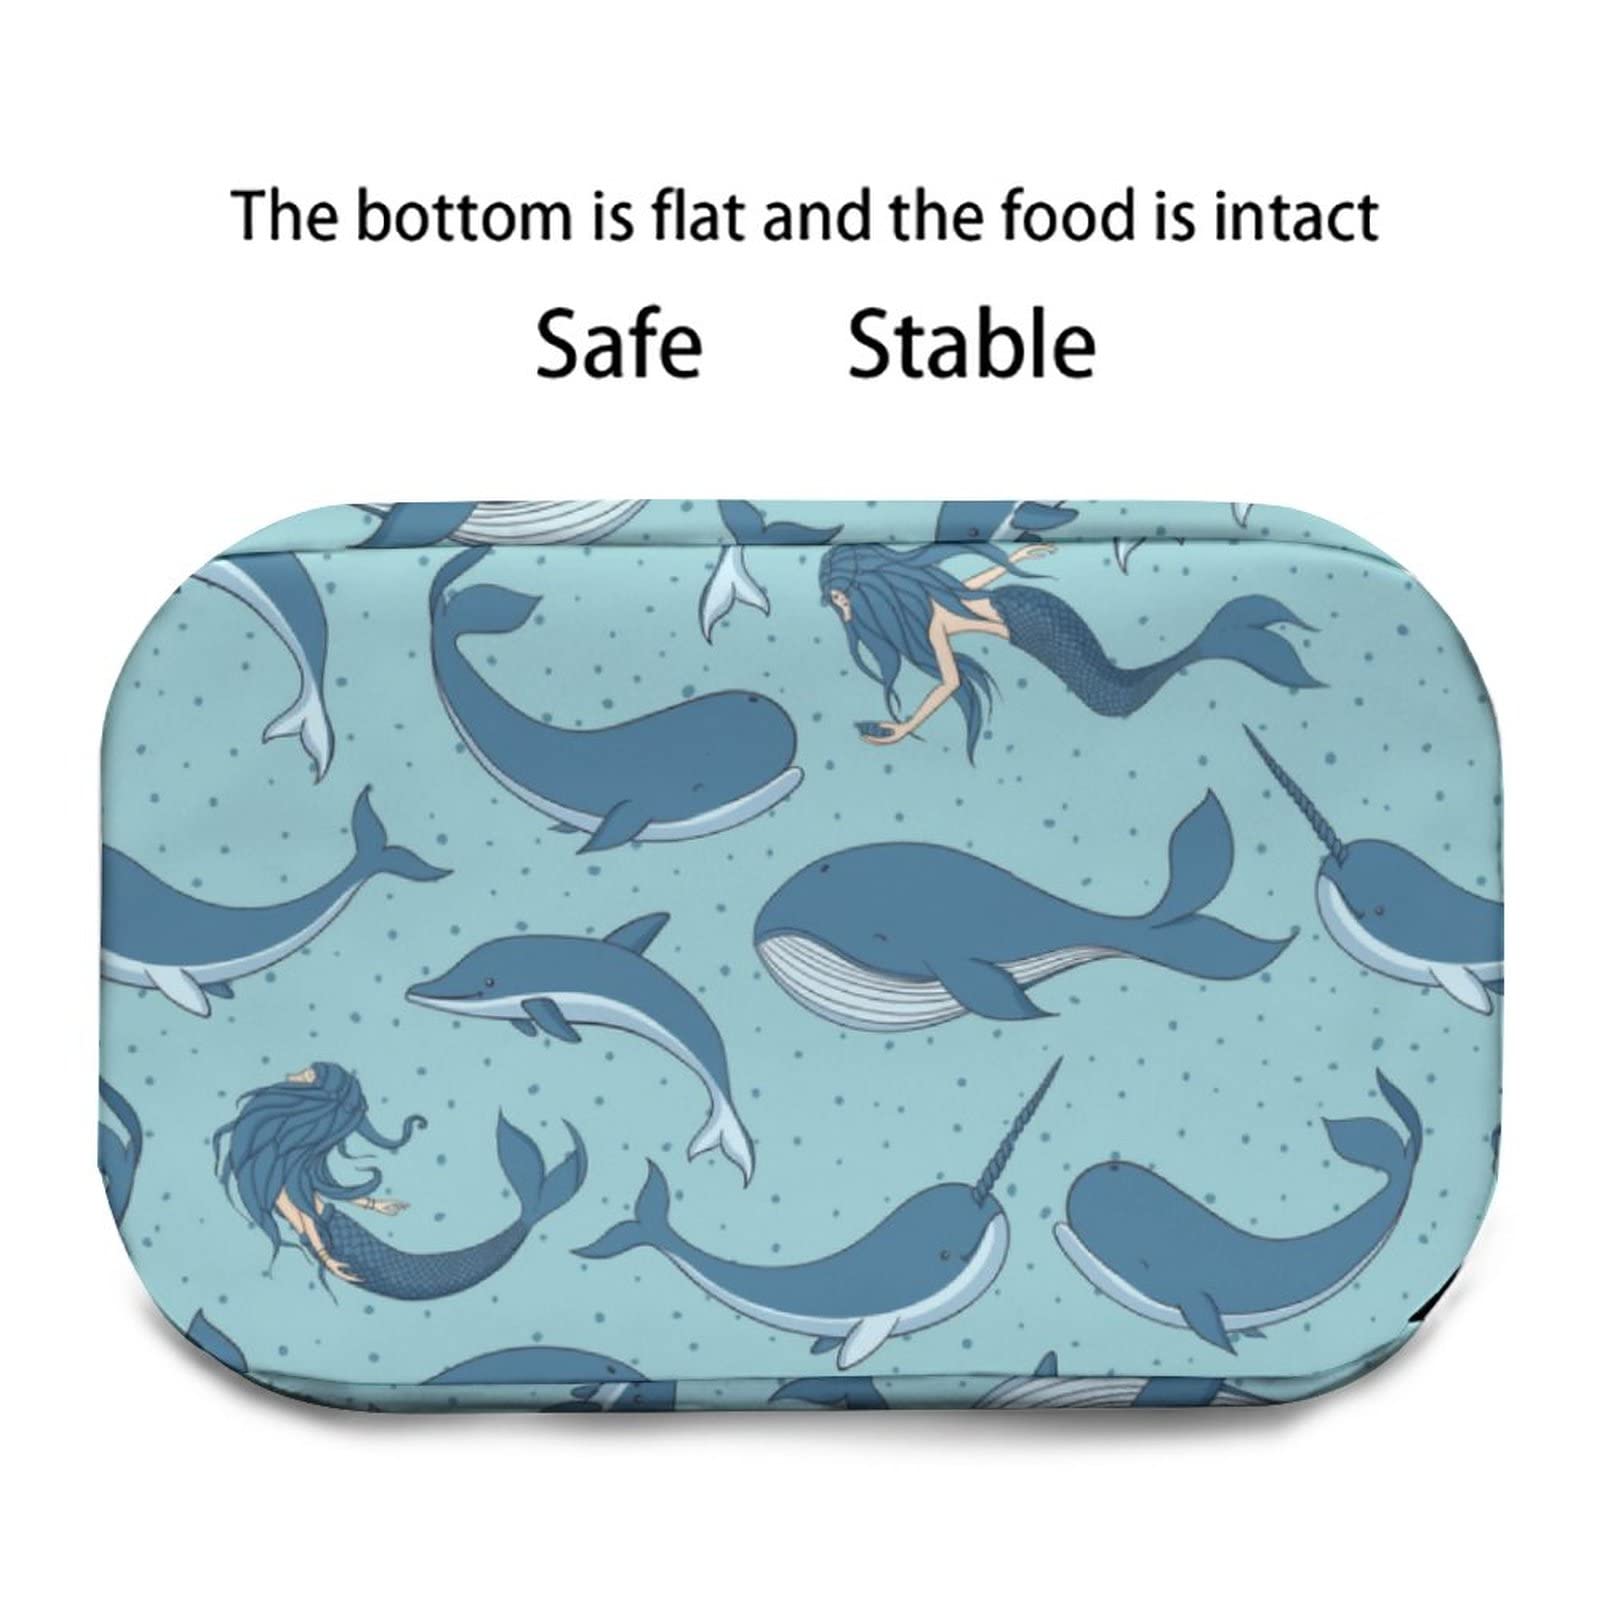 Whales Mermaids Narwhals Lunch Bag, Lunch Box Portable Insulated Lunch Tote Bag, Thermal Cooler Bag for Women Work Outdoor